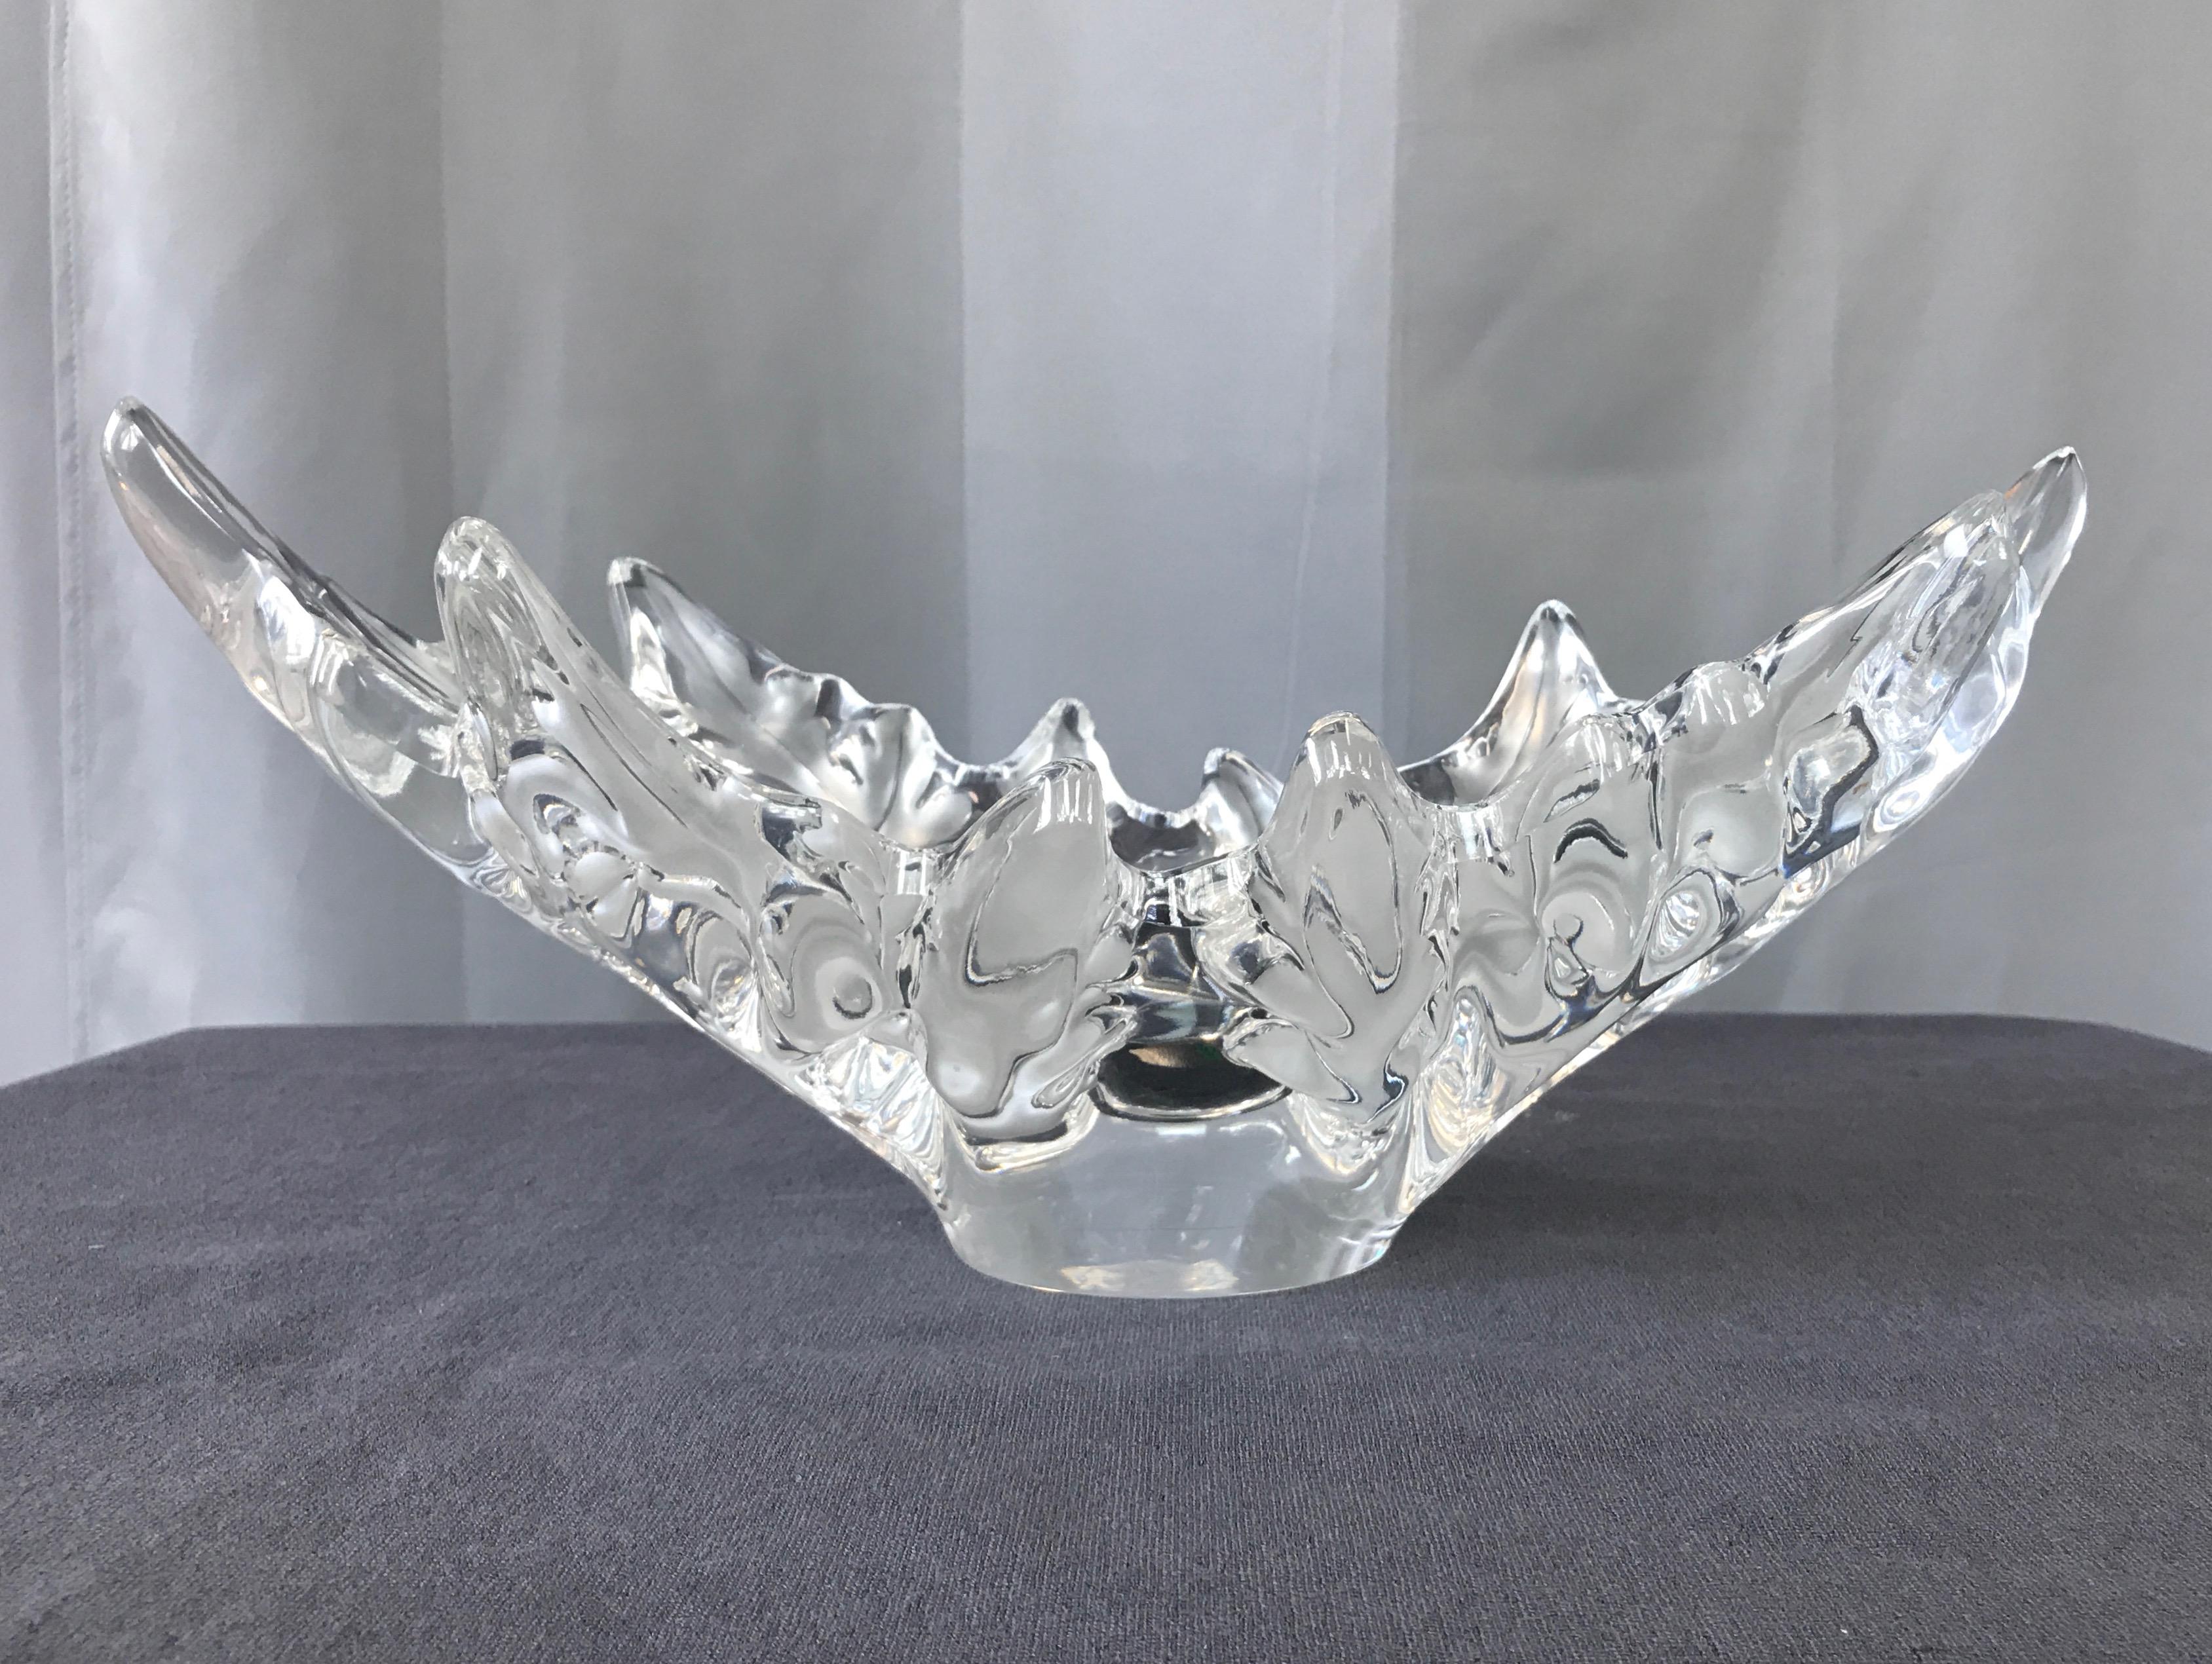 An impressive and elegant 1980s Lalique Champs-Élysées crystal centerpiece bowl, designed in 1951 by Marc Lalique.

Technically the medium size, though truly grand in both the French and English senses of the word. Masterfully sculpted molded lead